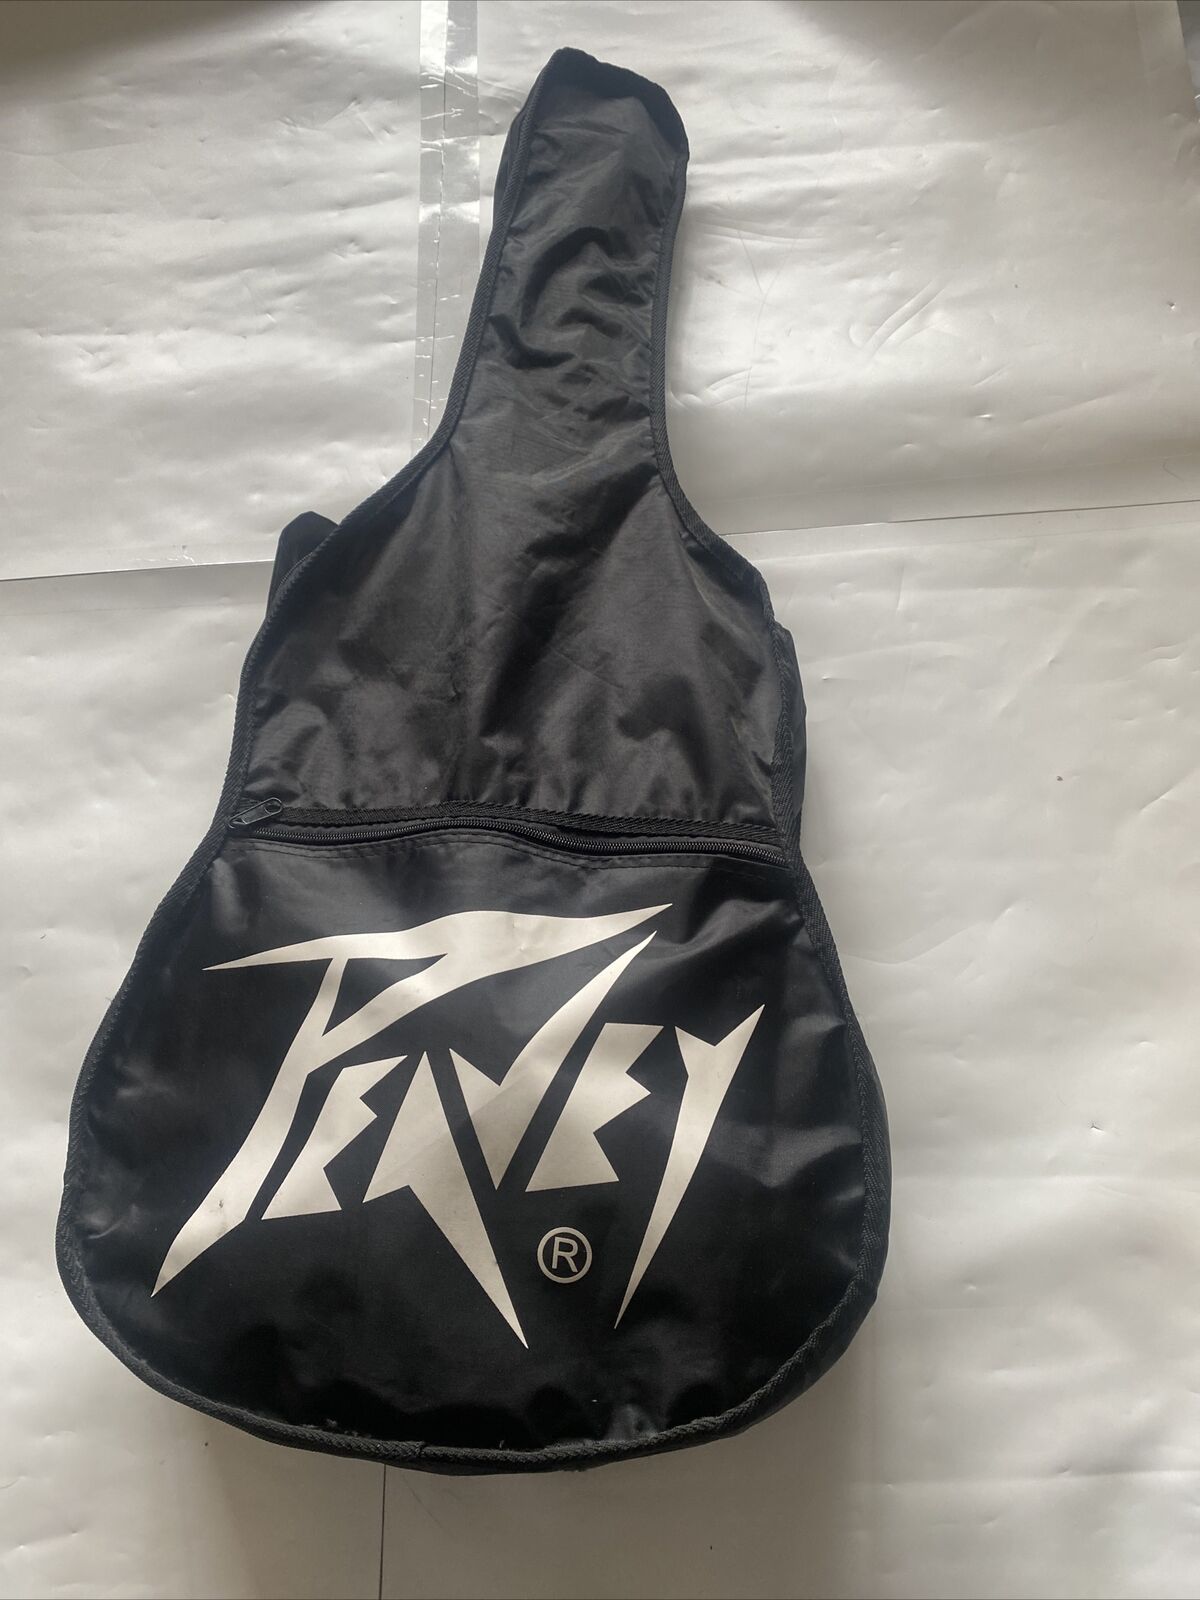 peavey acoustic guitar used With Peavey Soft Case 13